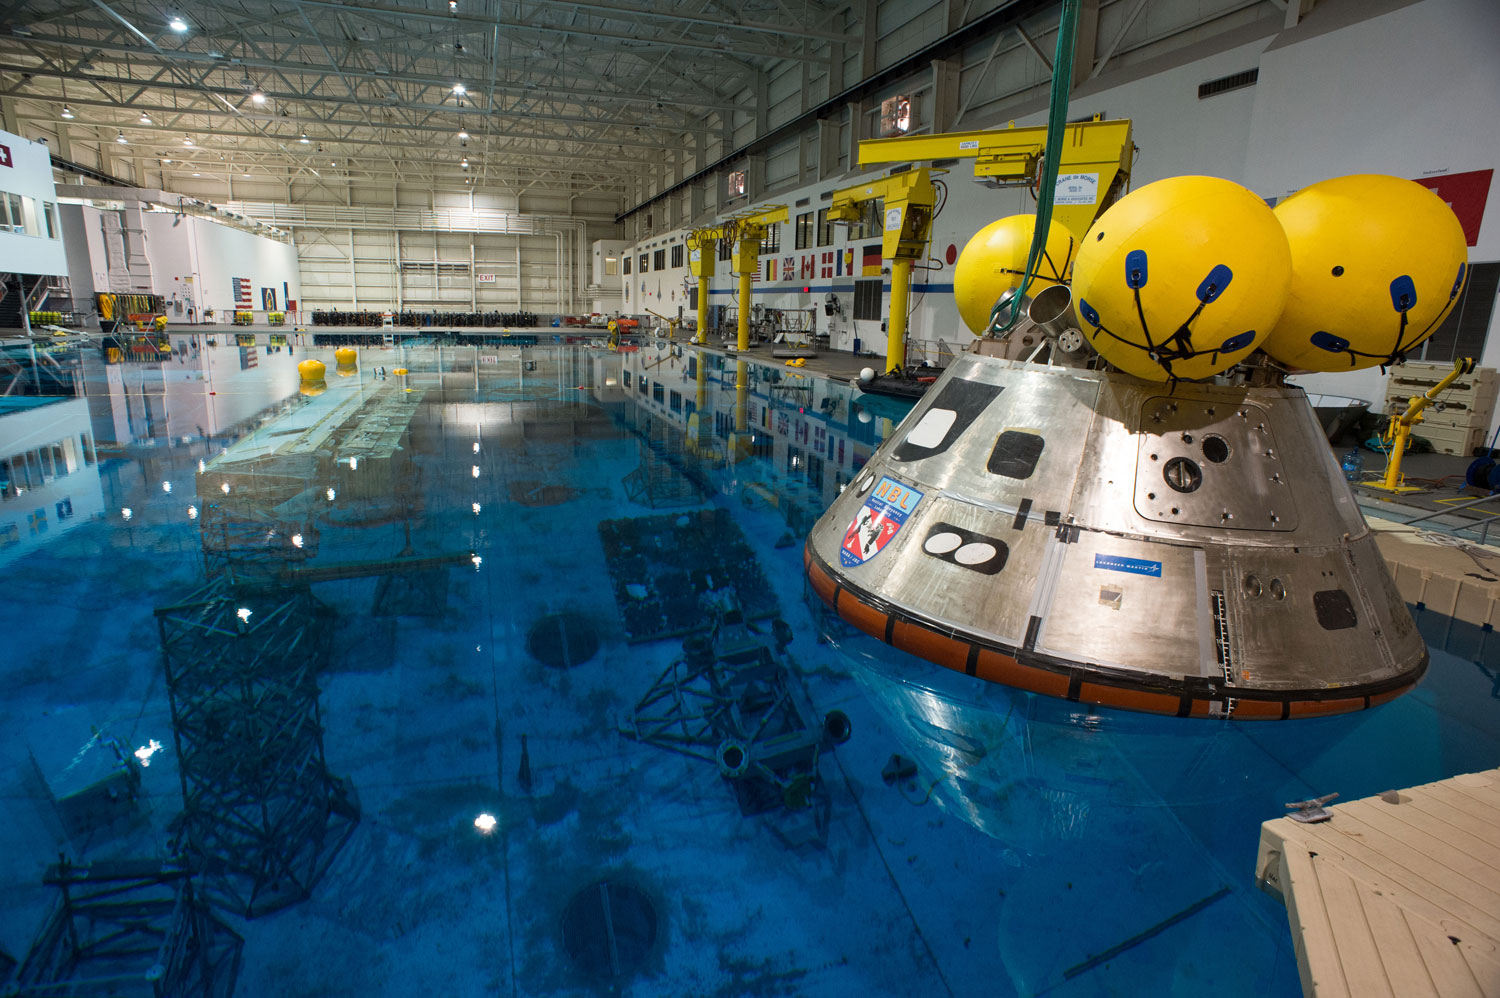 A model of Orion floats above an underwater mockup of the International Space Station in the 40-foot (12 m) deep Neutral Buoyancy Laboratory in Houston on April 25, 2013. The model is used to practice splashdown operations for Orion's first flight test in 2014. The yellow balls on the top of the capsule are flotation balloons which would flip the vehicle into the proper orientation if it were to turn upside down after landing.